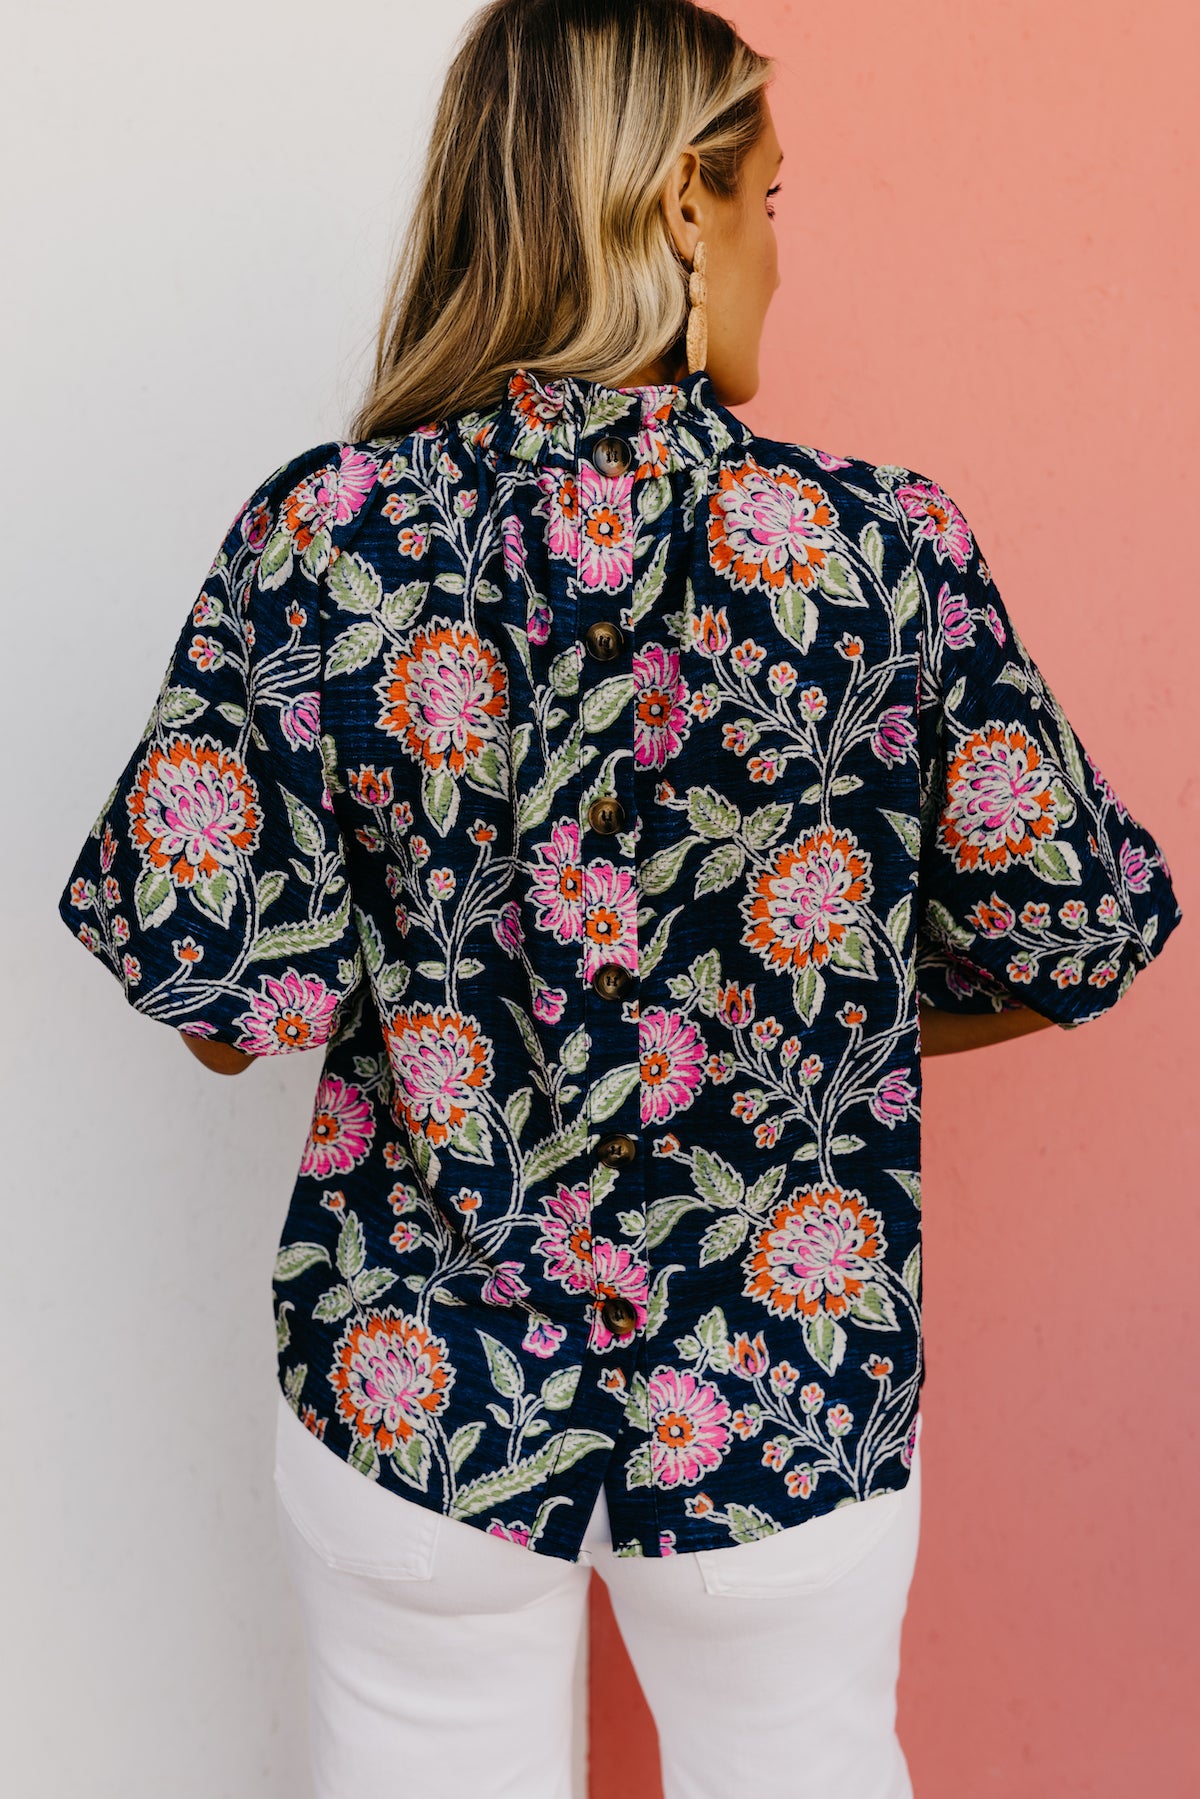 The Camille Floral Button Back Top